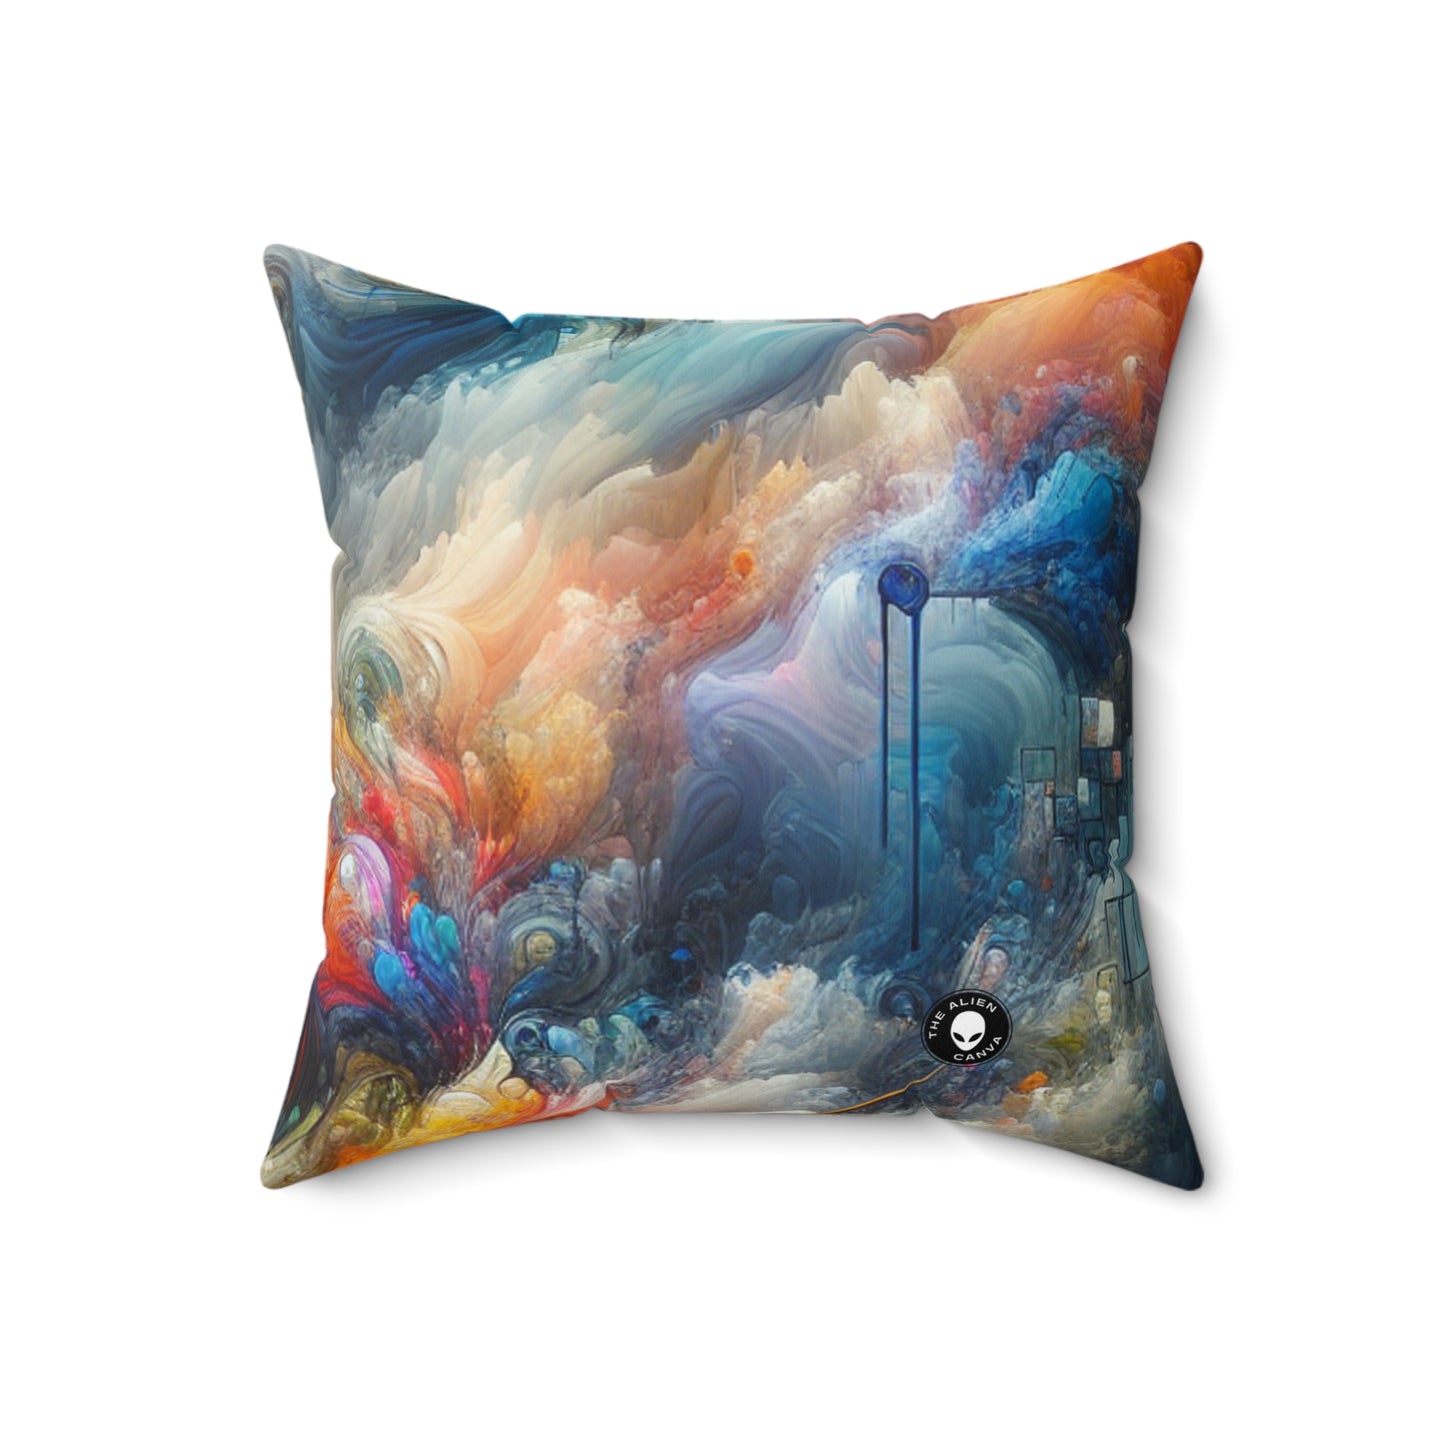 "Mystical Forest: A Whimsical Wonderland"- The Alien Spun Polyester Square Pillow Digital Painting